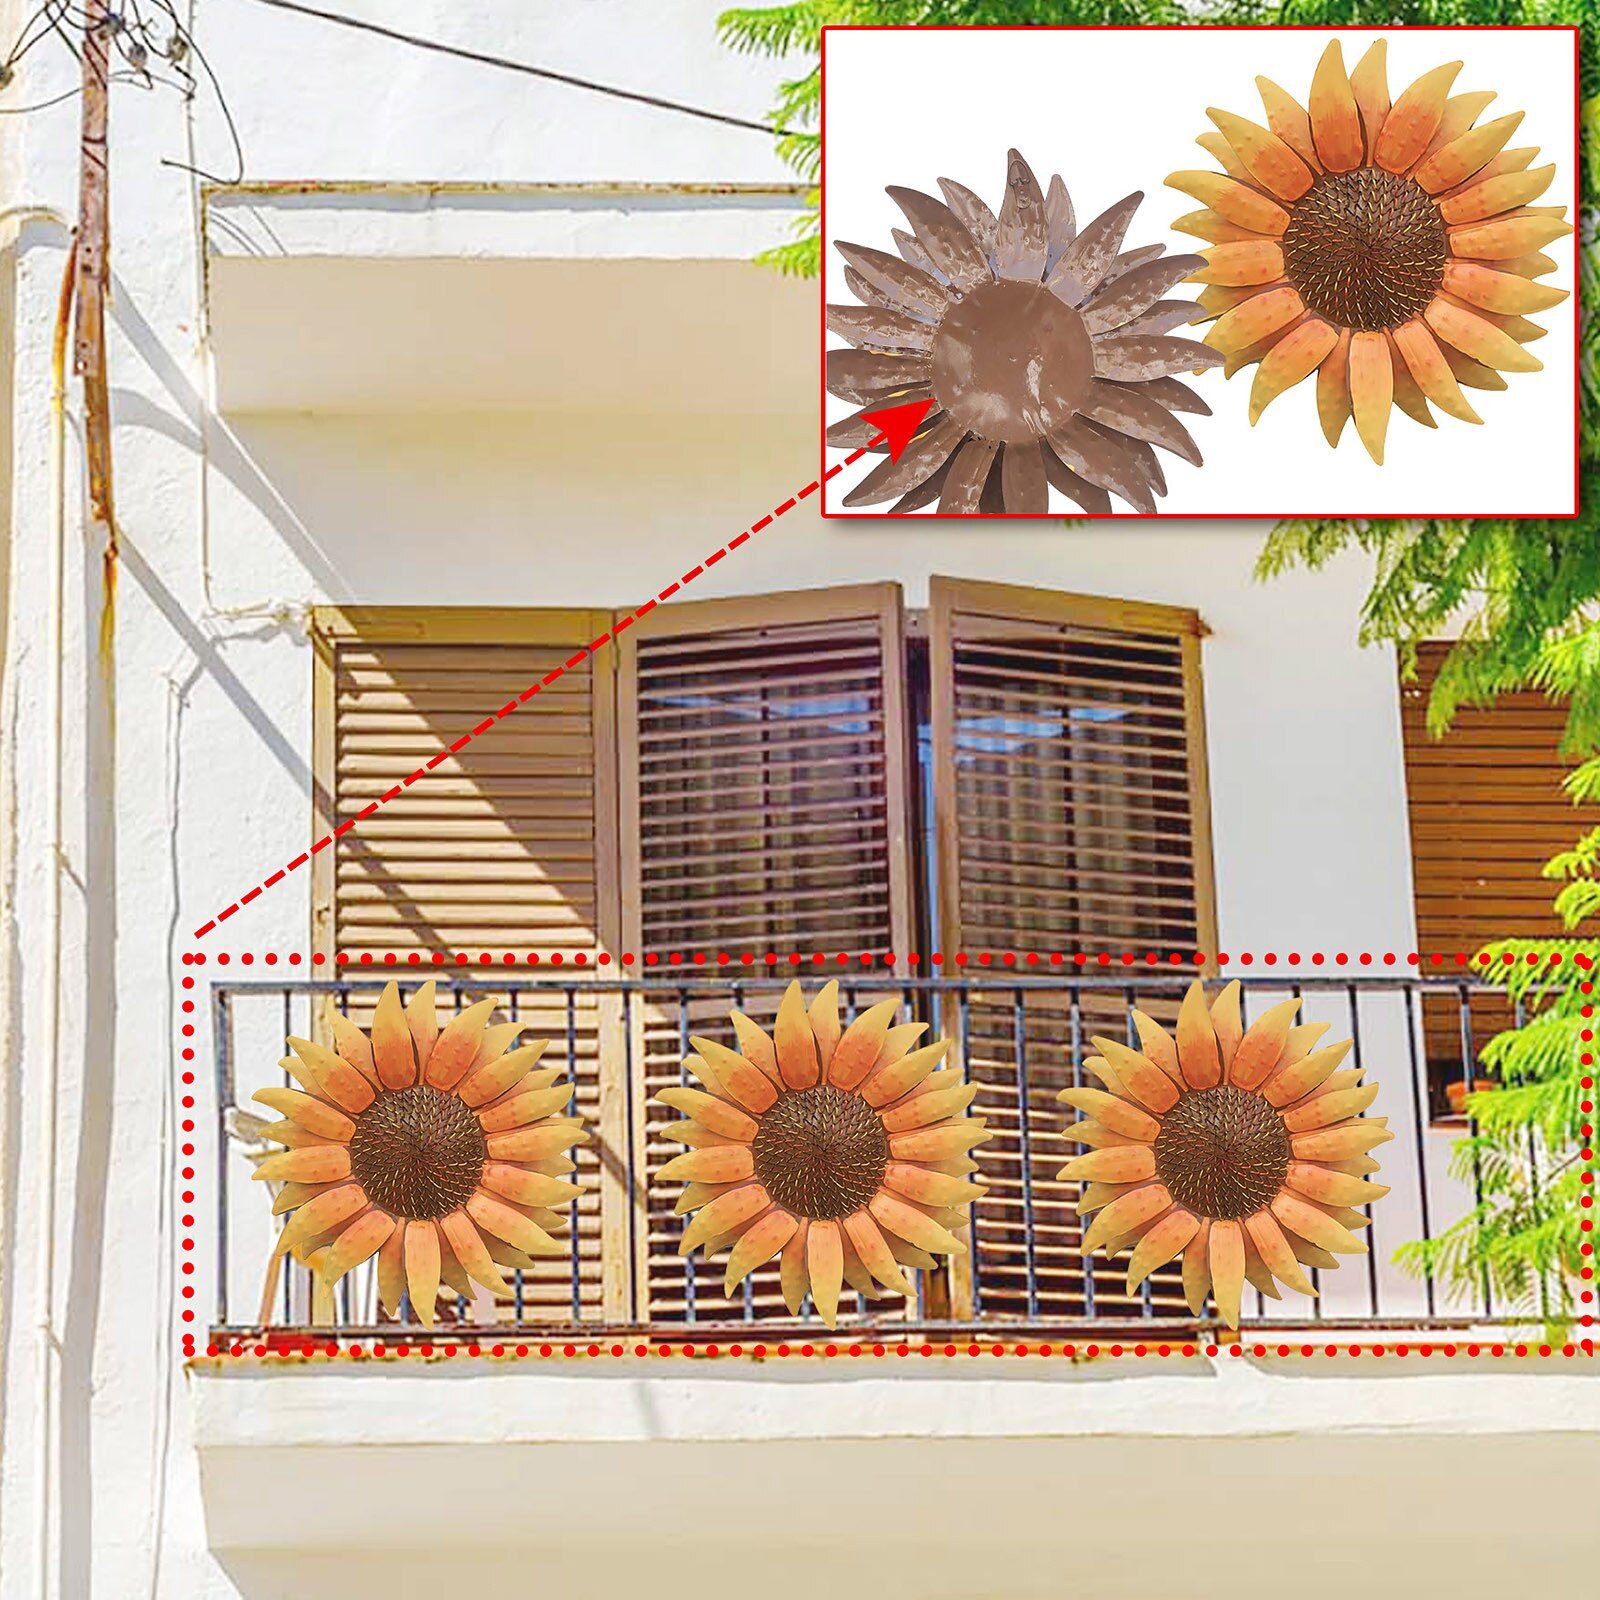 Sunflower Metal Flower Wall Sculptures Yellow Art Home Decoration For Bathroom  Bedroom Balcony Porch Patio Fence Garden Outdoor Within Recent Bathroom Bedroom Fence Wall Art (View 17 of 20)